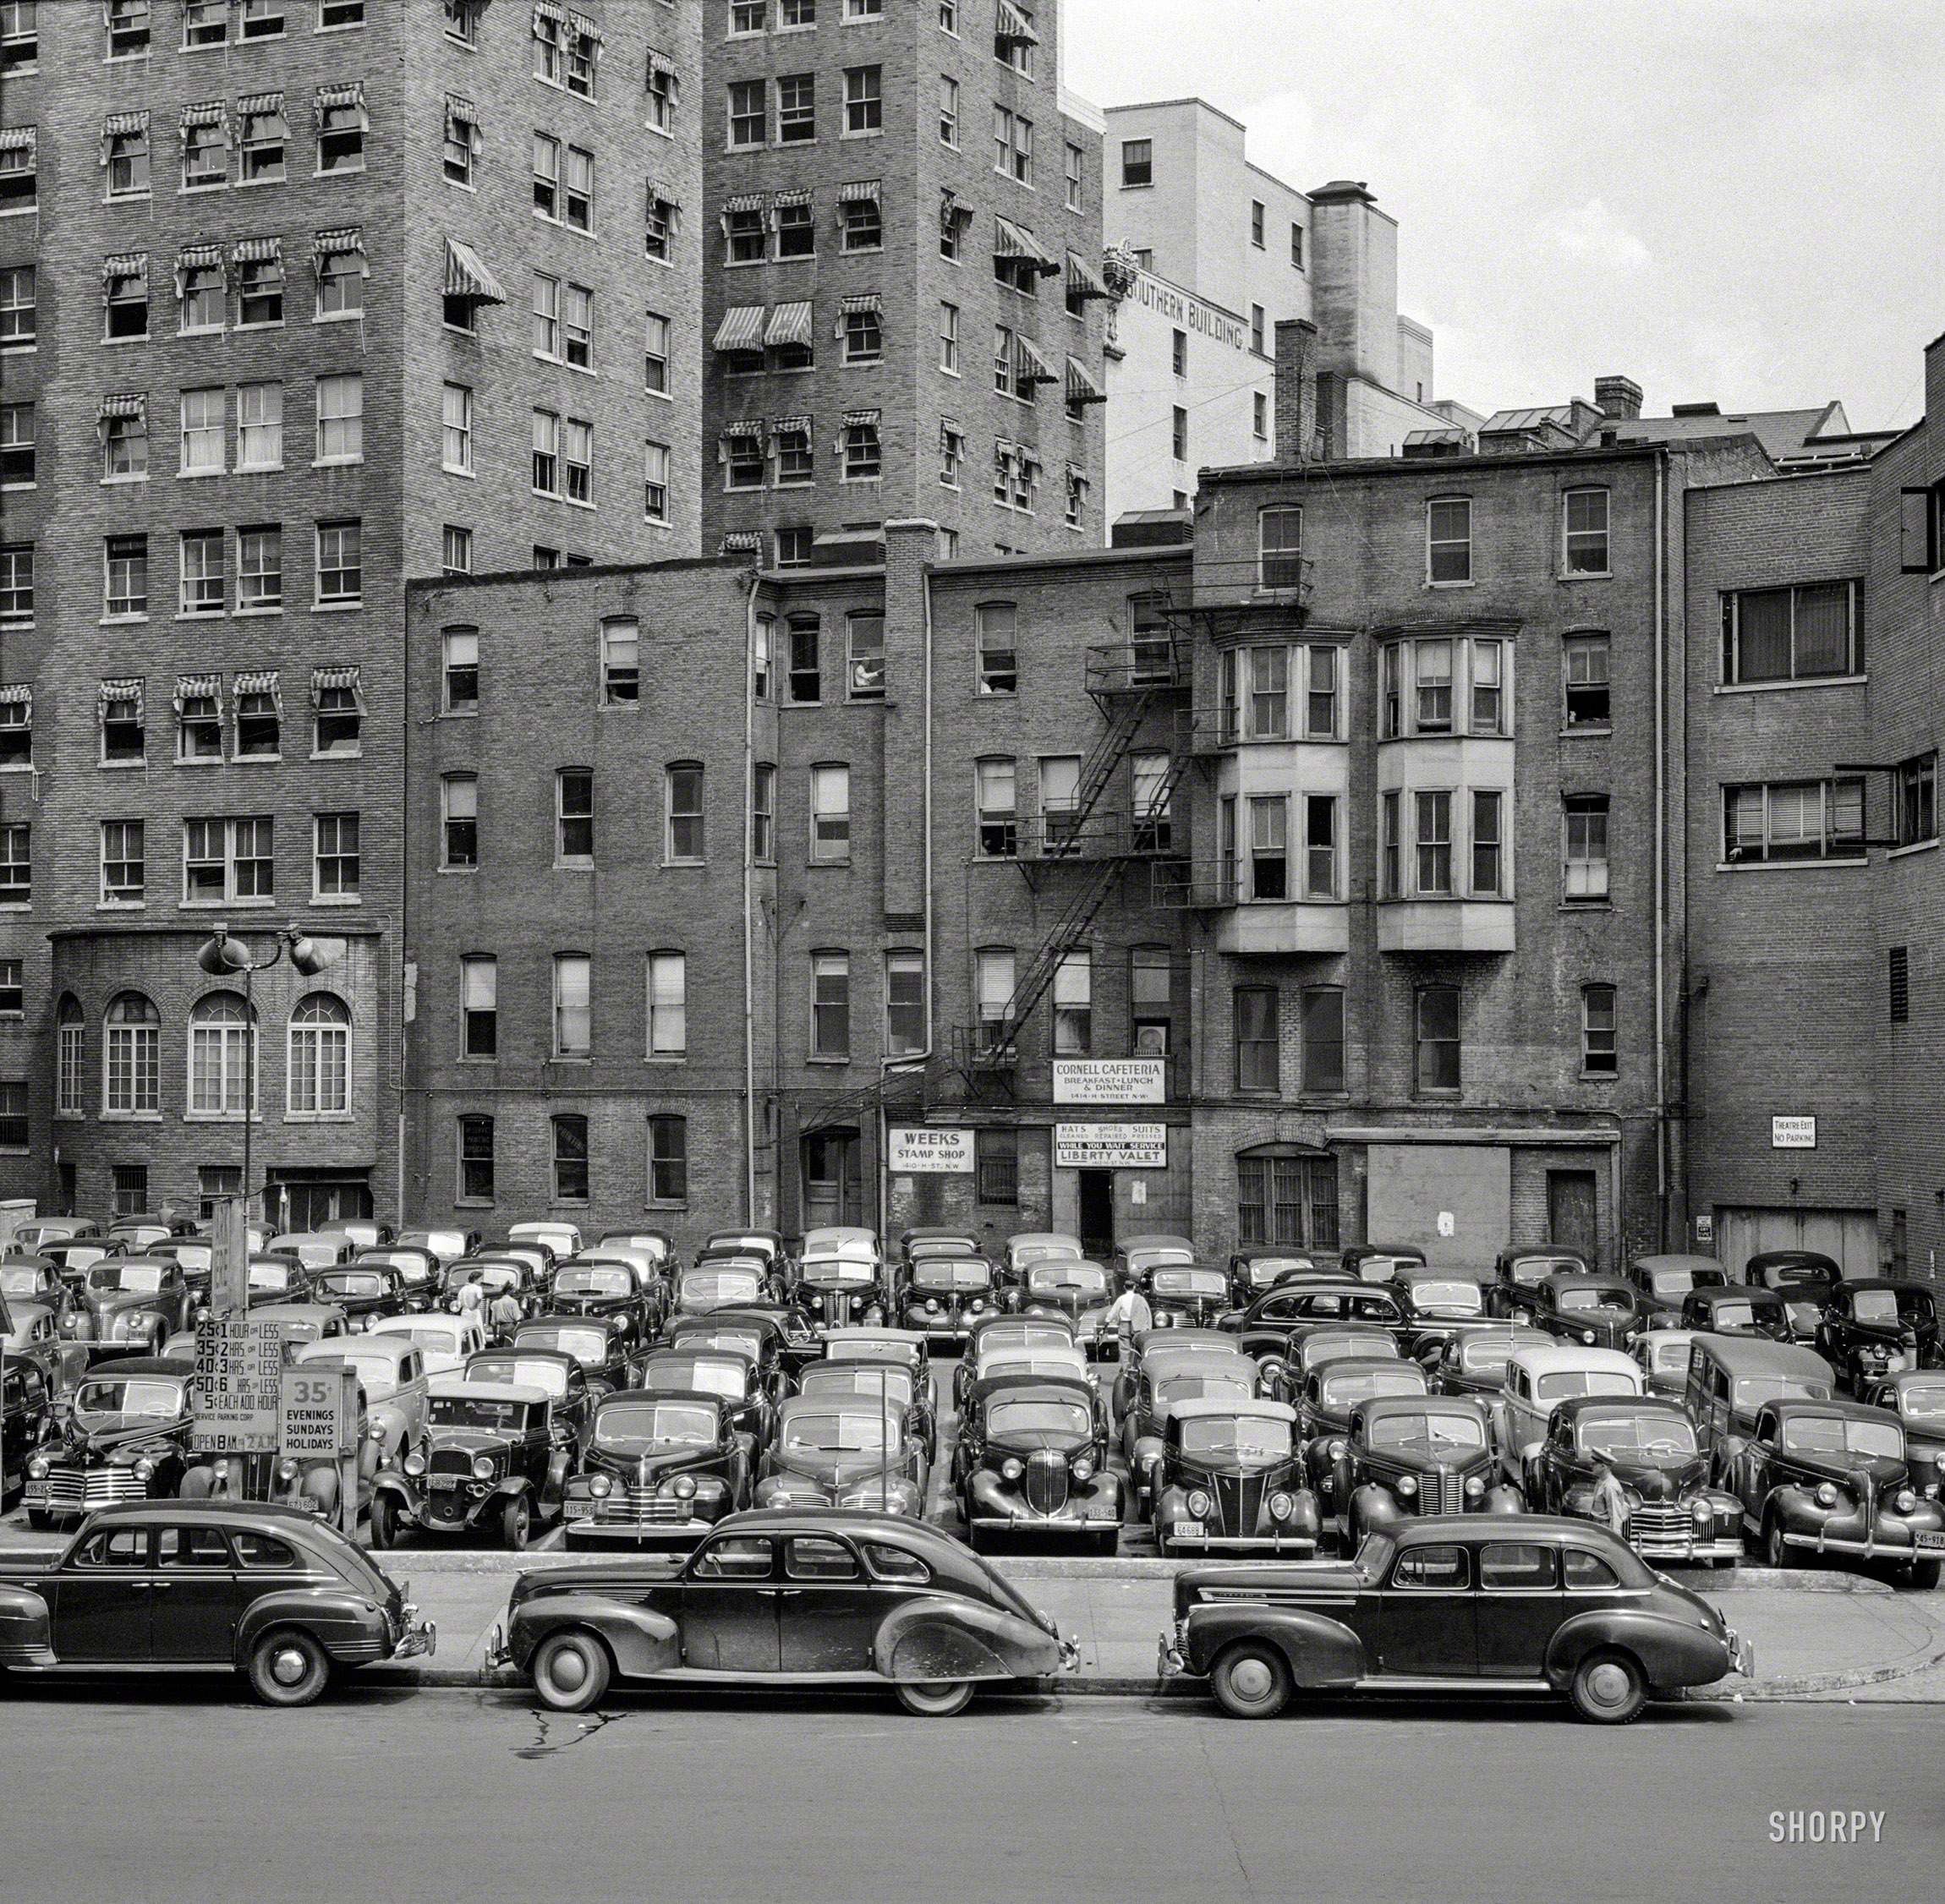 1942. "Effect of gasoline shortage in Washington, D.C." Medium format nitrate negative by Albert Freeman for the Office of War Information. View full size.